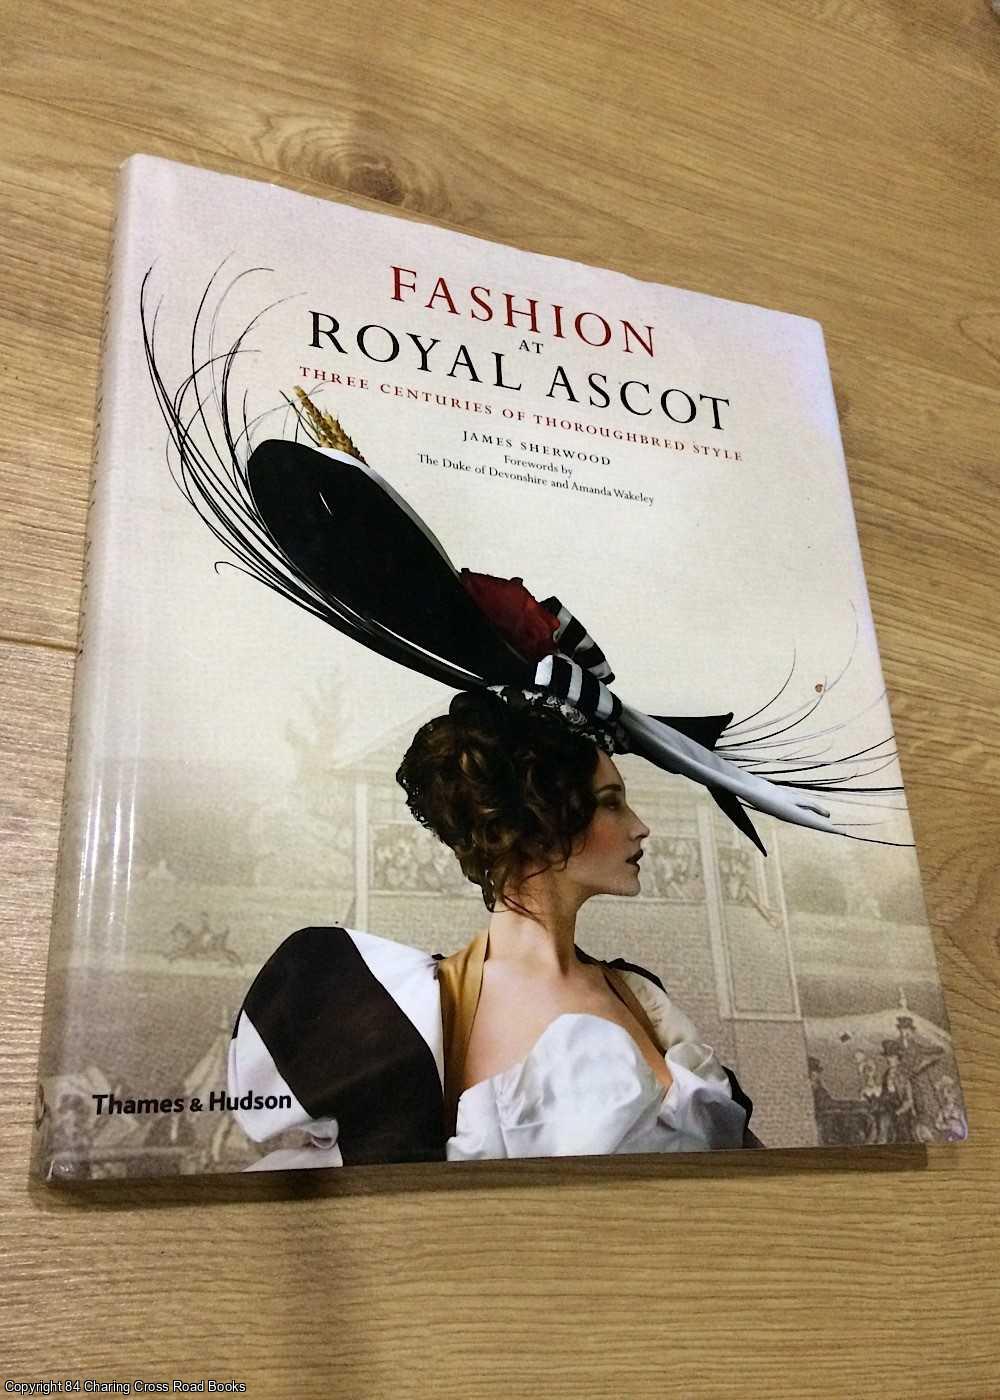 James Sherwood, The Duke of Devonshire - Fashion at Royal Ascot: Three Centuries of Thoroughbred Style